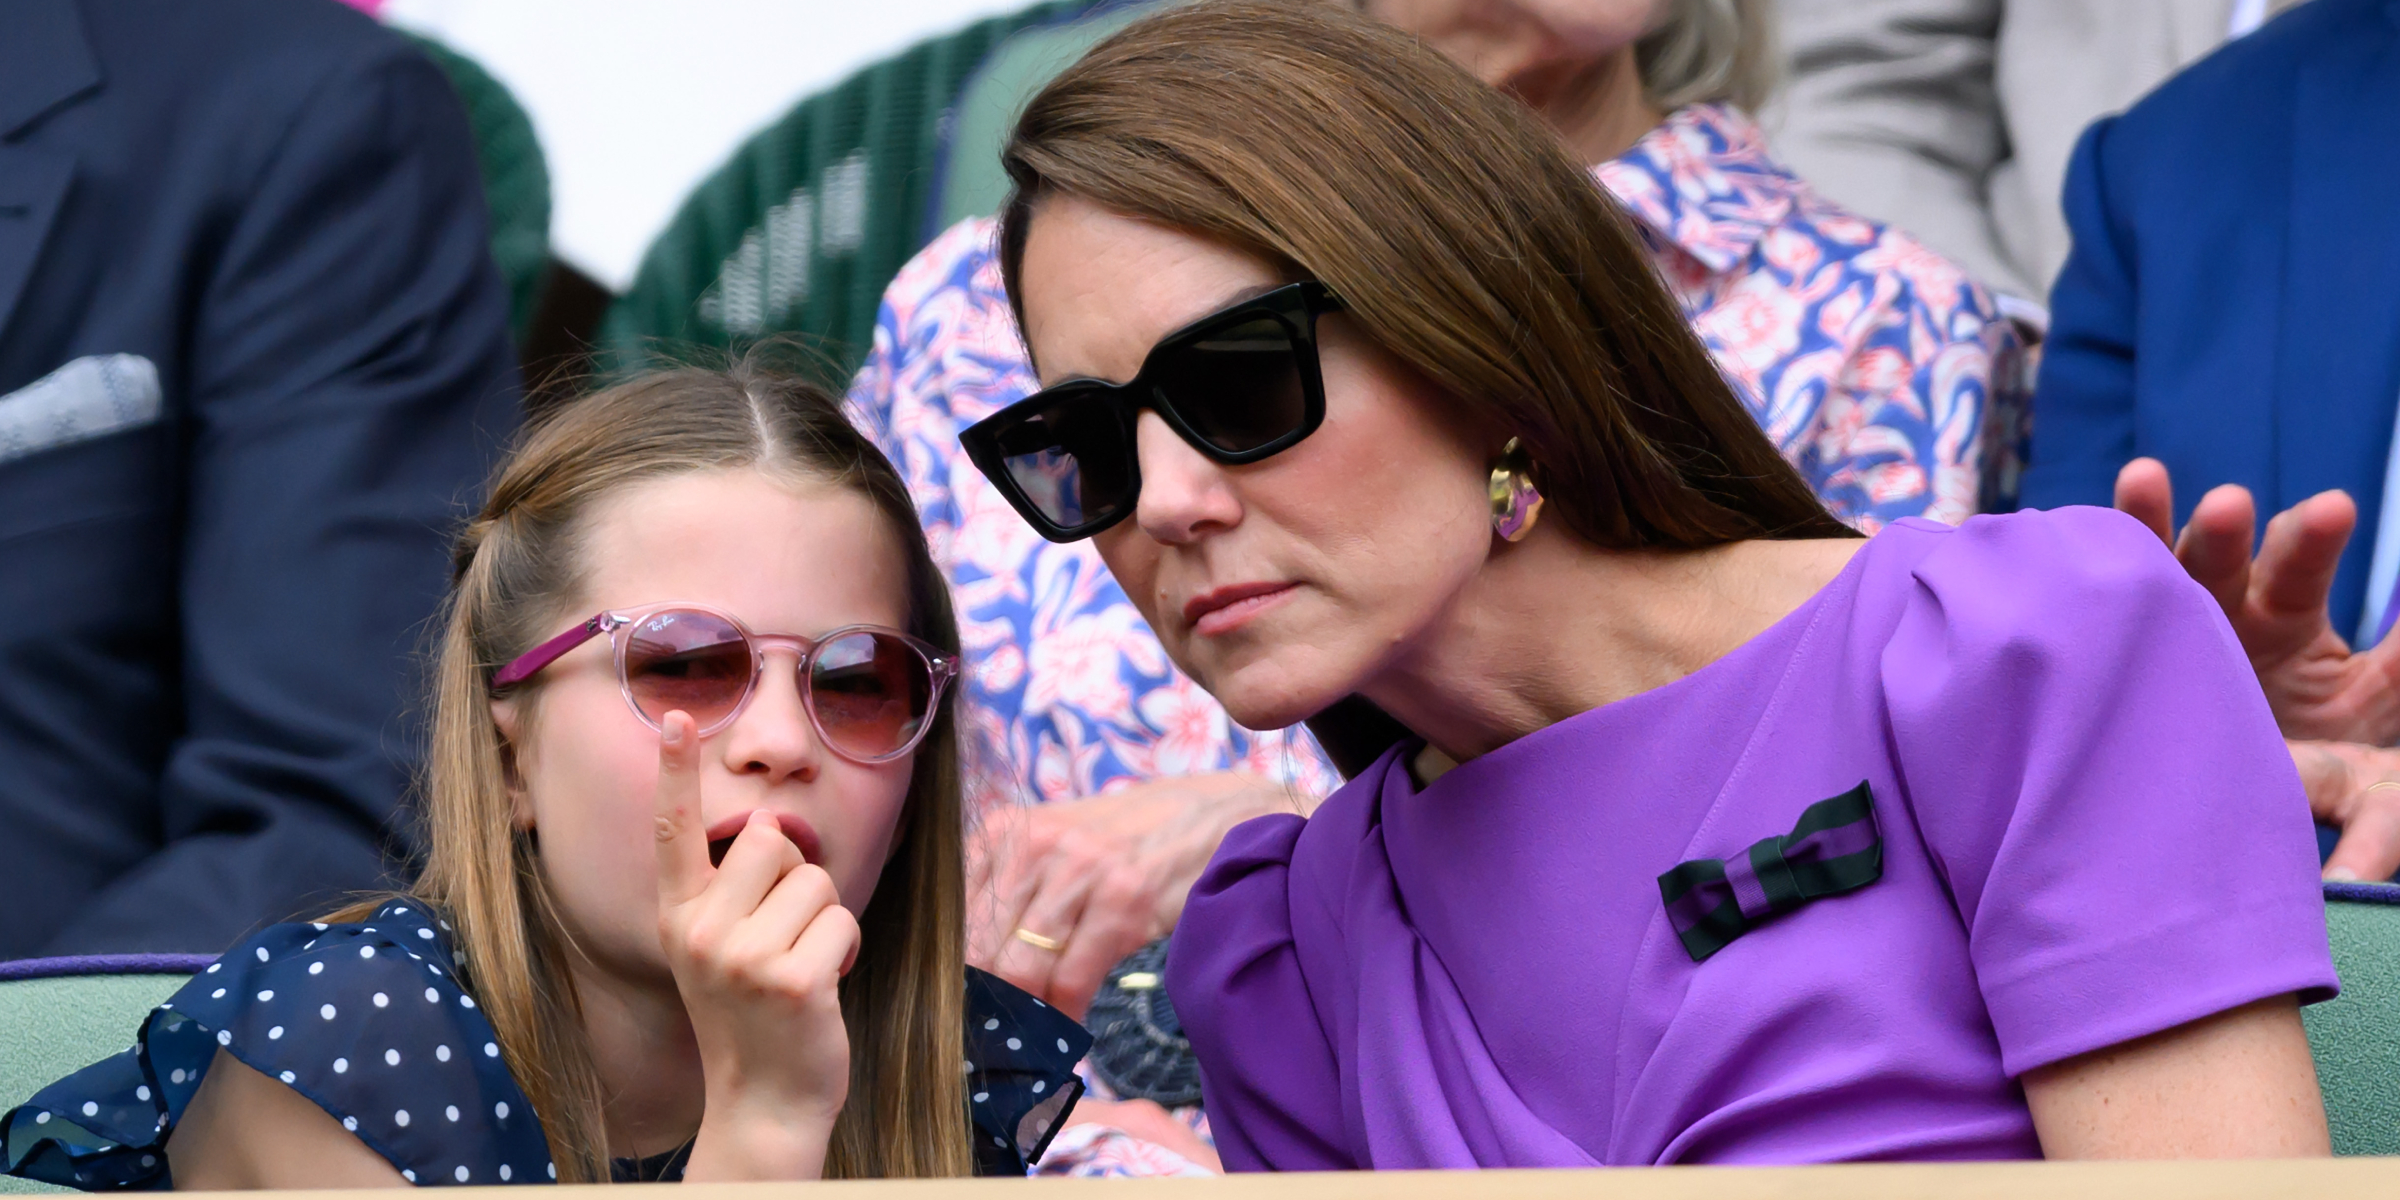 Prince Charlotte and Princess Catherine | Source: Getty Images